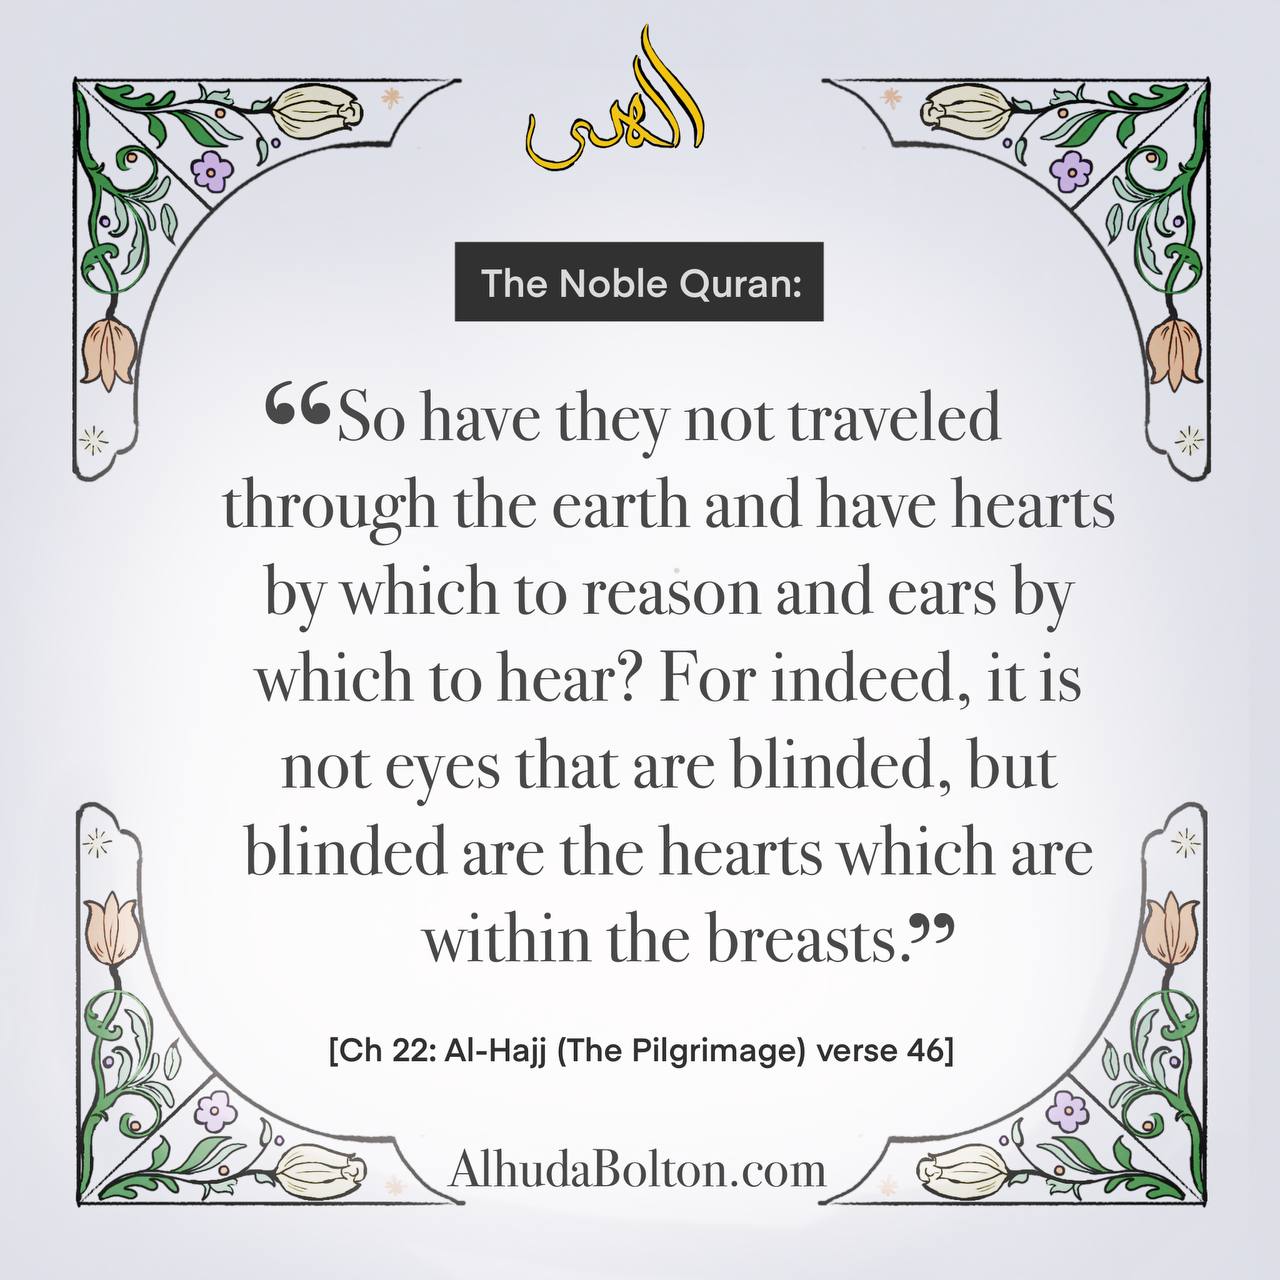 Quran: It is not the eyes that are blinded